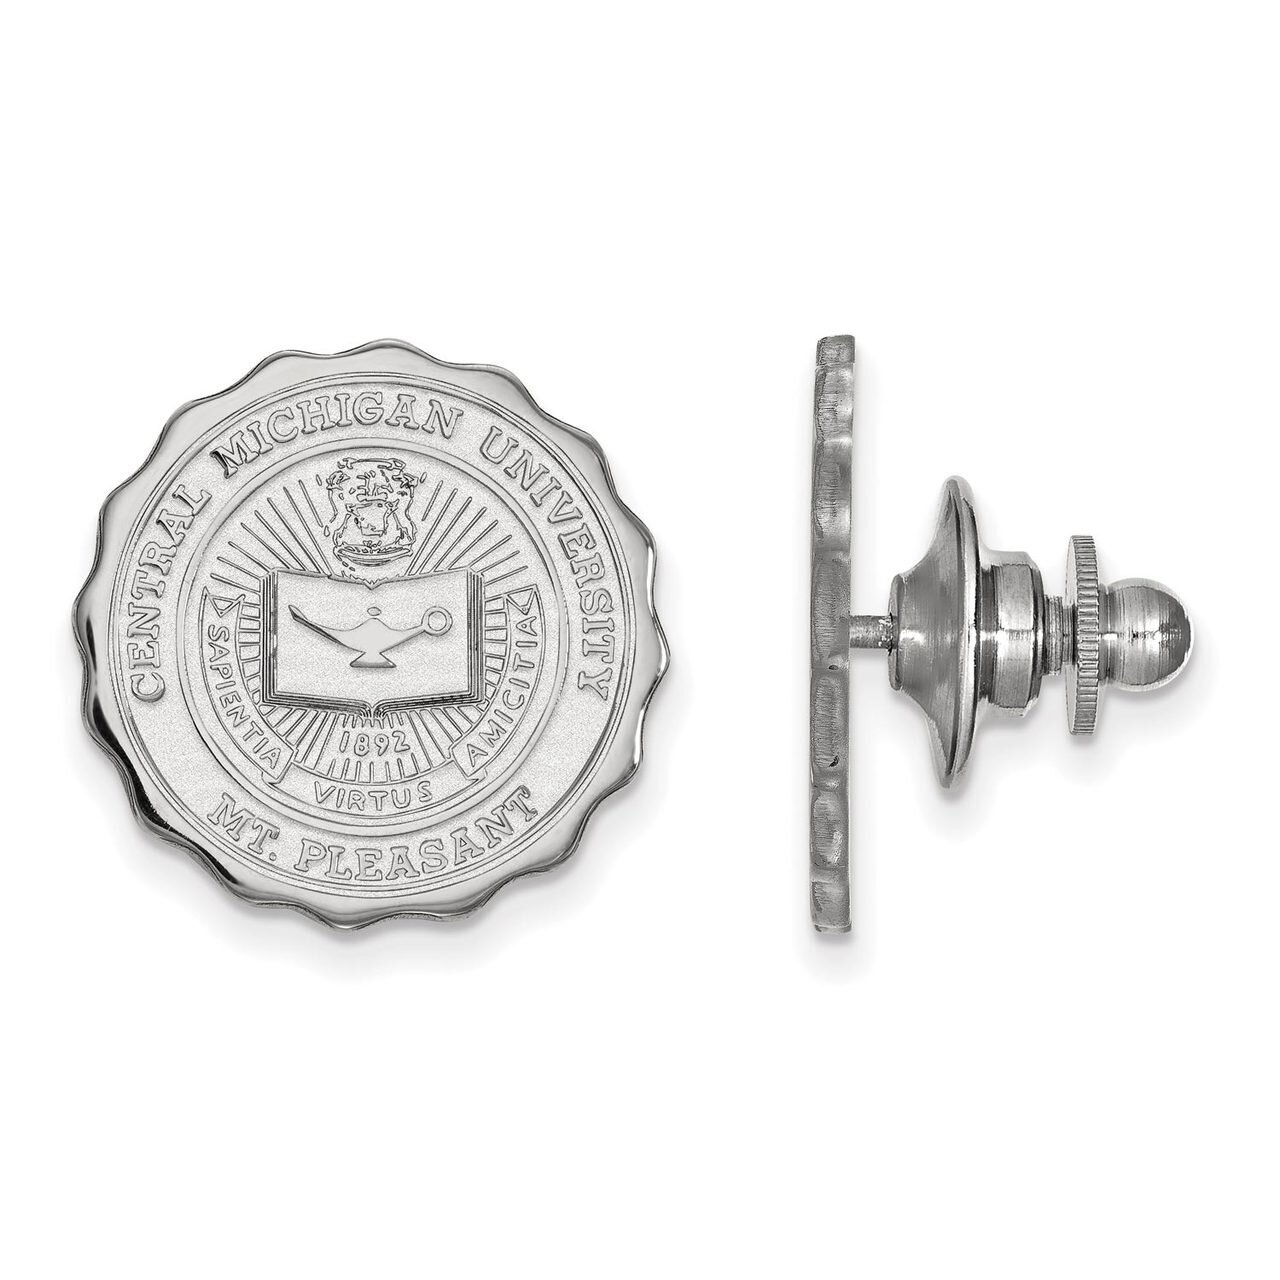 Central Michigan University Crest Lapel Pin Sterling Silver SS017CMU